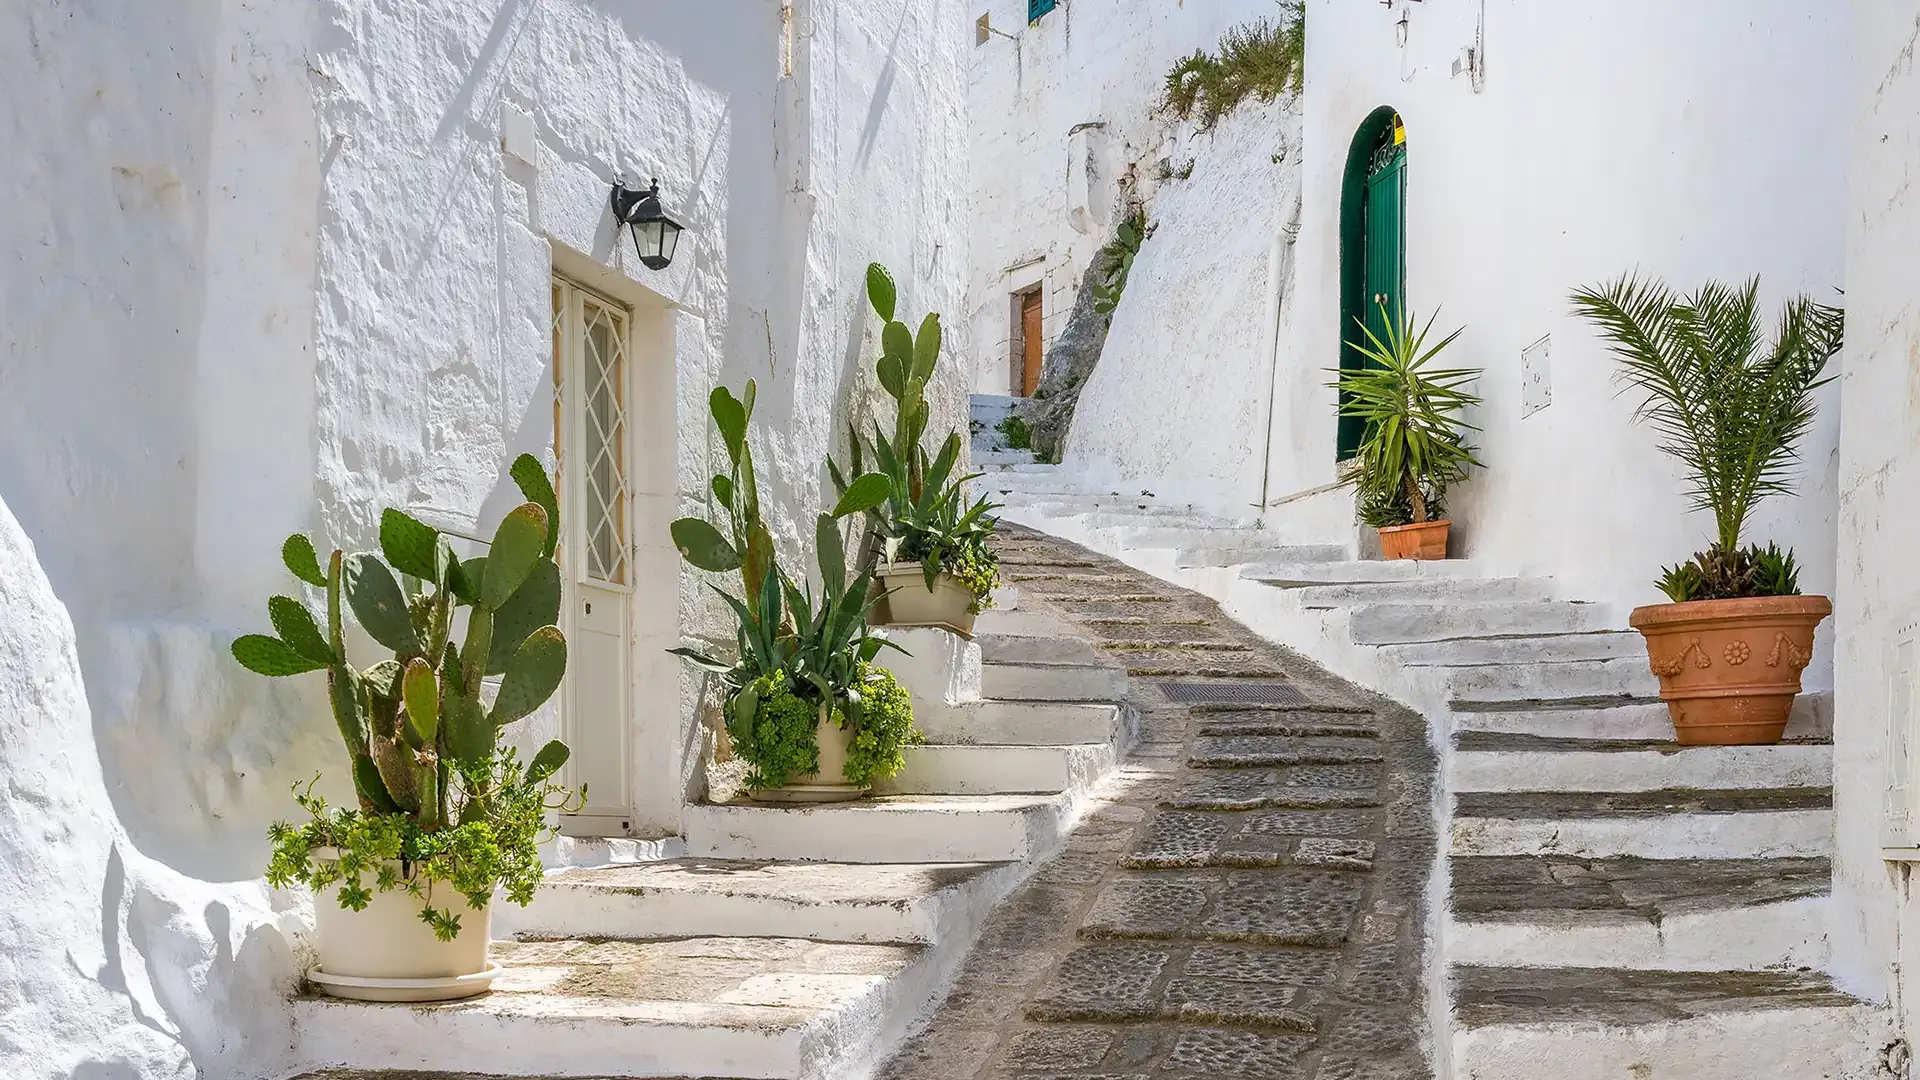 White alley with stairs and potted plants in a Mediterranean village.